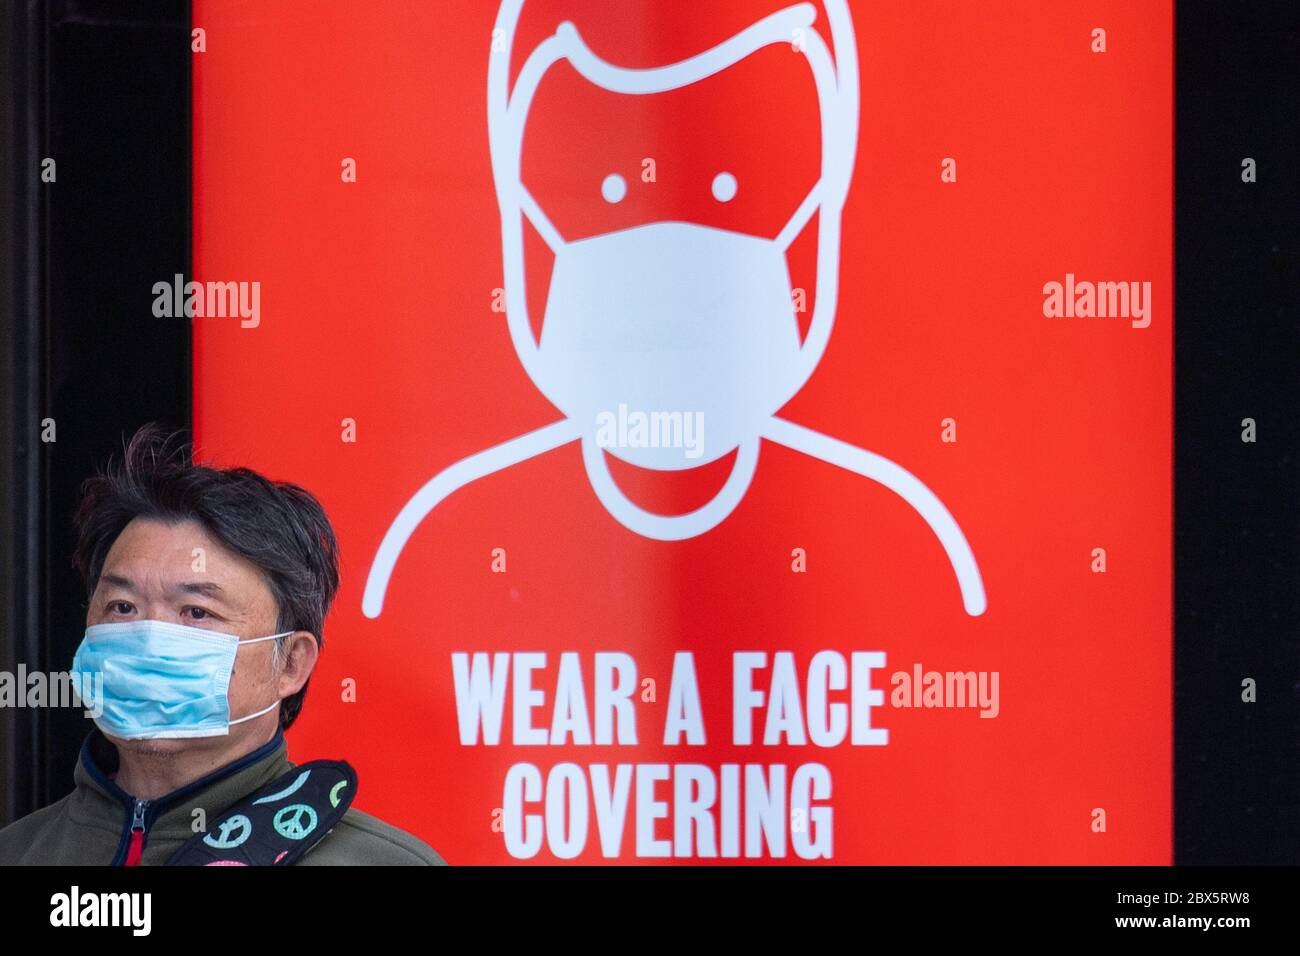 A man wearing a protective face mask waits at a bus stop in central London displaying a notice advising passengers to wear a face covering on public transport, following the announcement that wearing a face covering will be mandatory for passengers on public transport in England from June 15. Stock Photo